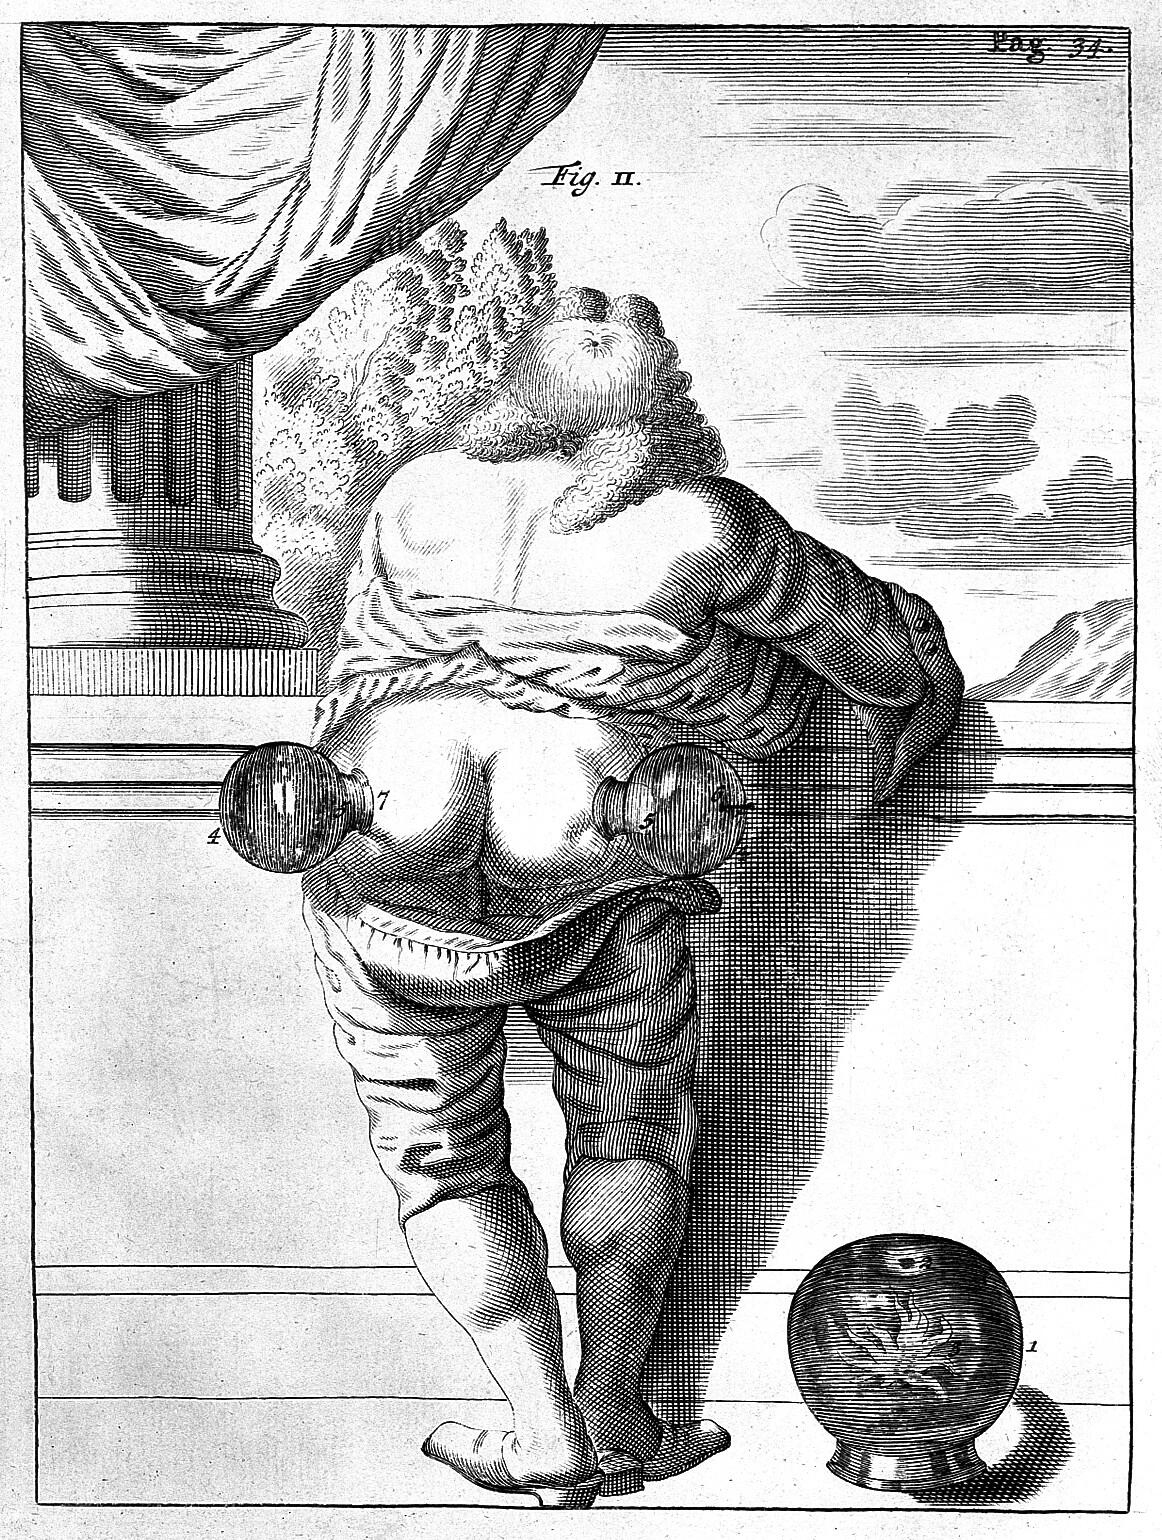 Black and white engraving showing the rear of a man who has his breeches pulled down and a cupping cup prominently fastened to each buttock. In the background are classical details such as a column and drape. 